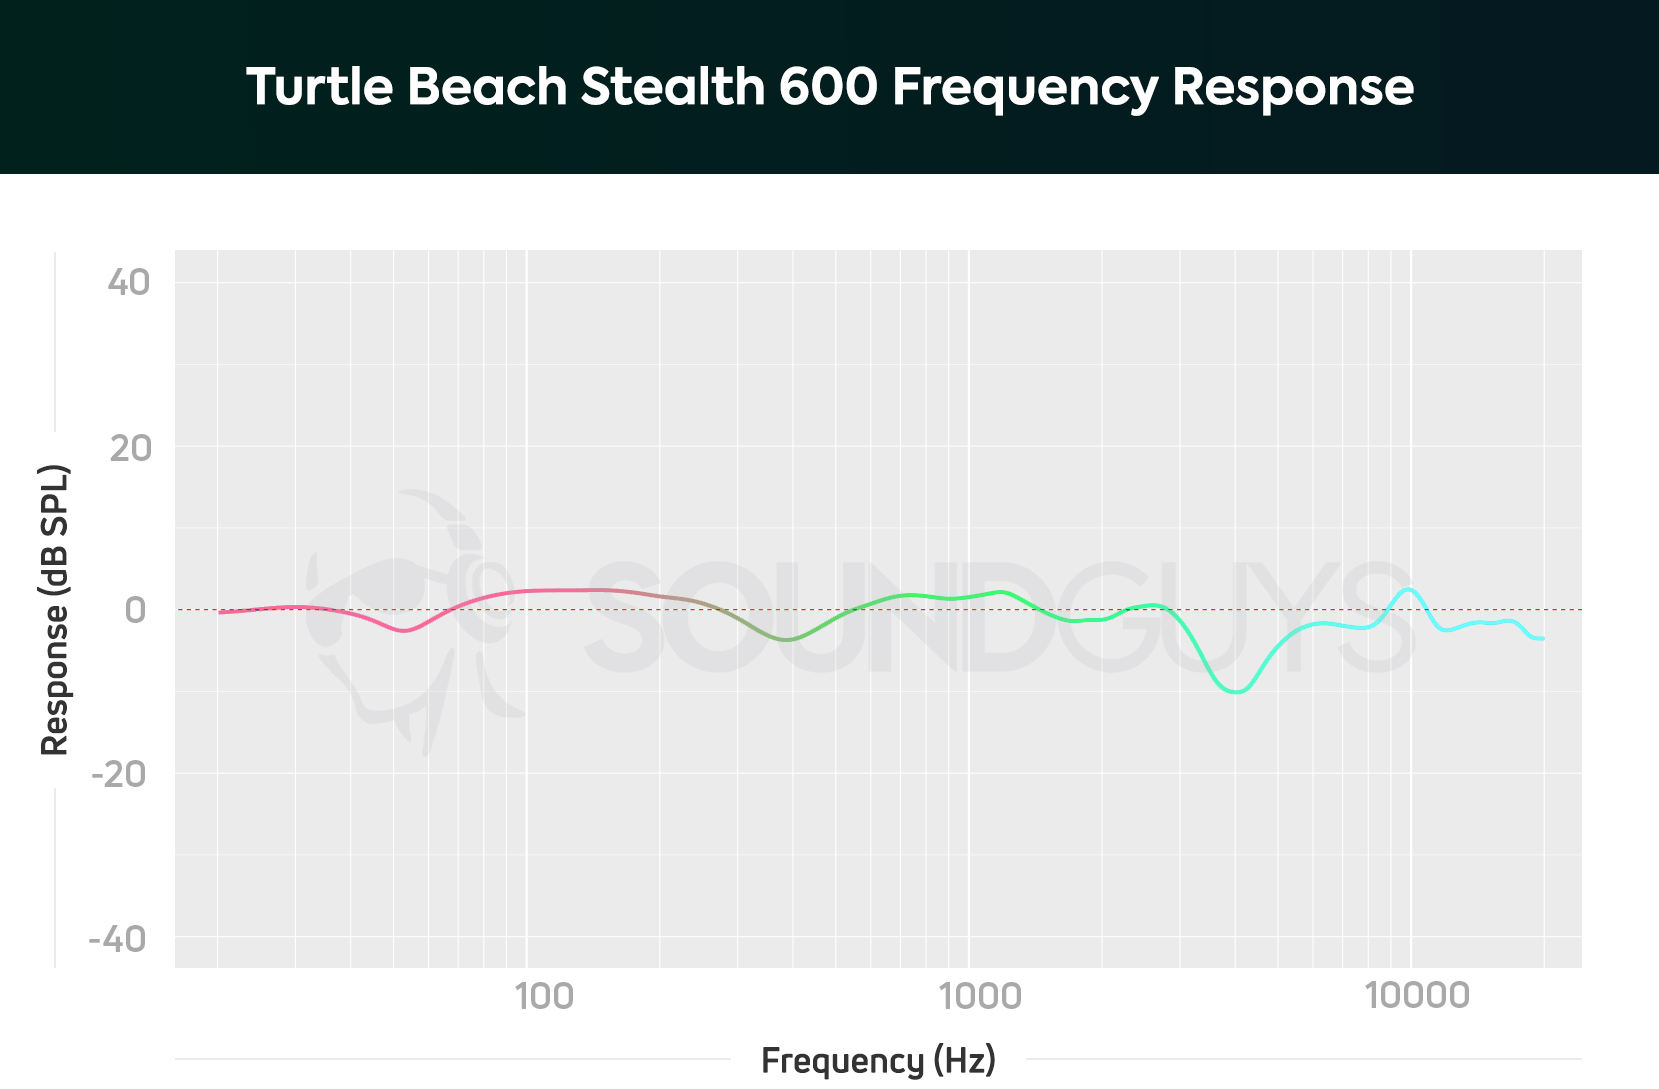 The Turtle Beach Stealth 600 Gen 2 gaming headset frequency response chart depicts a neutral-leaning sound.